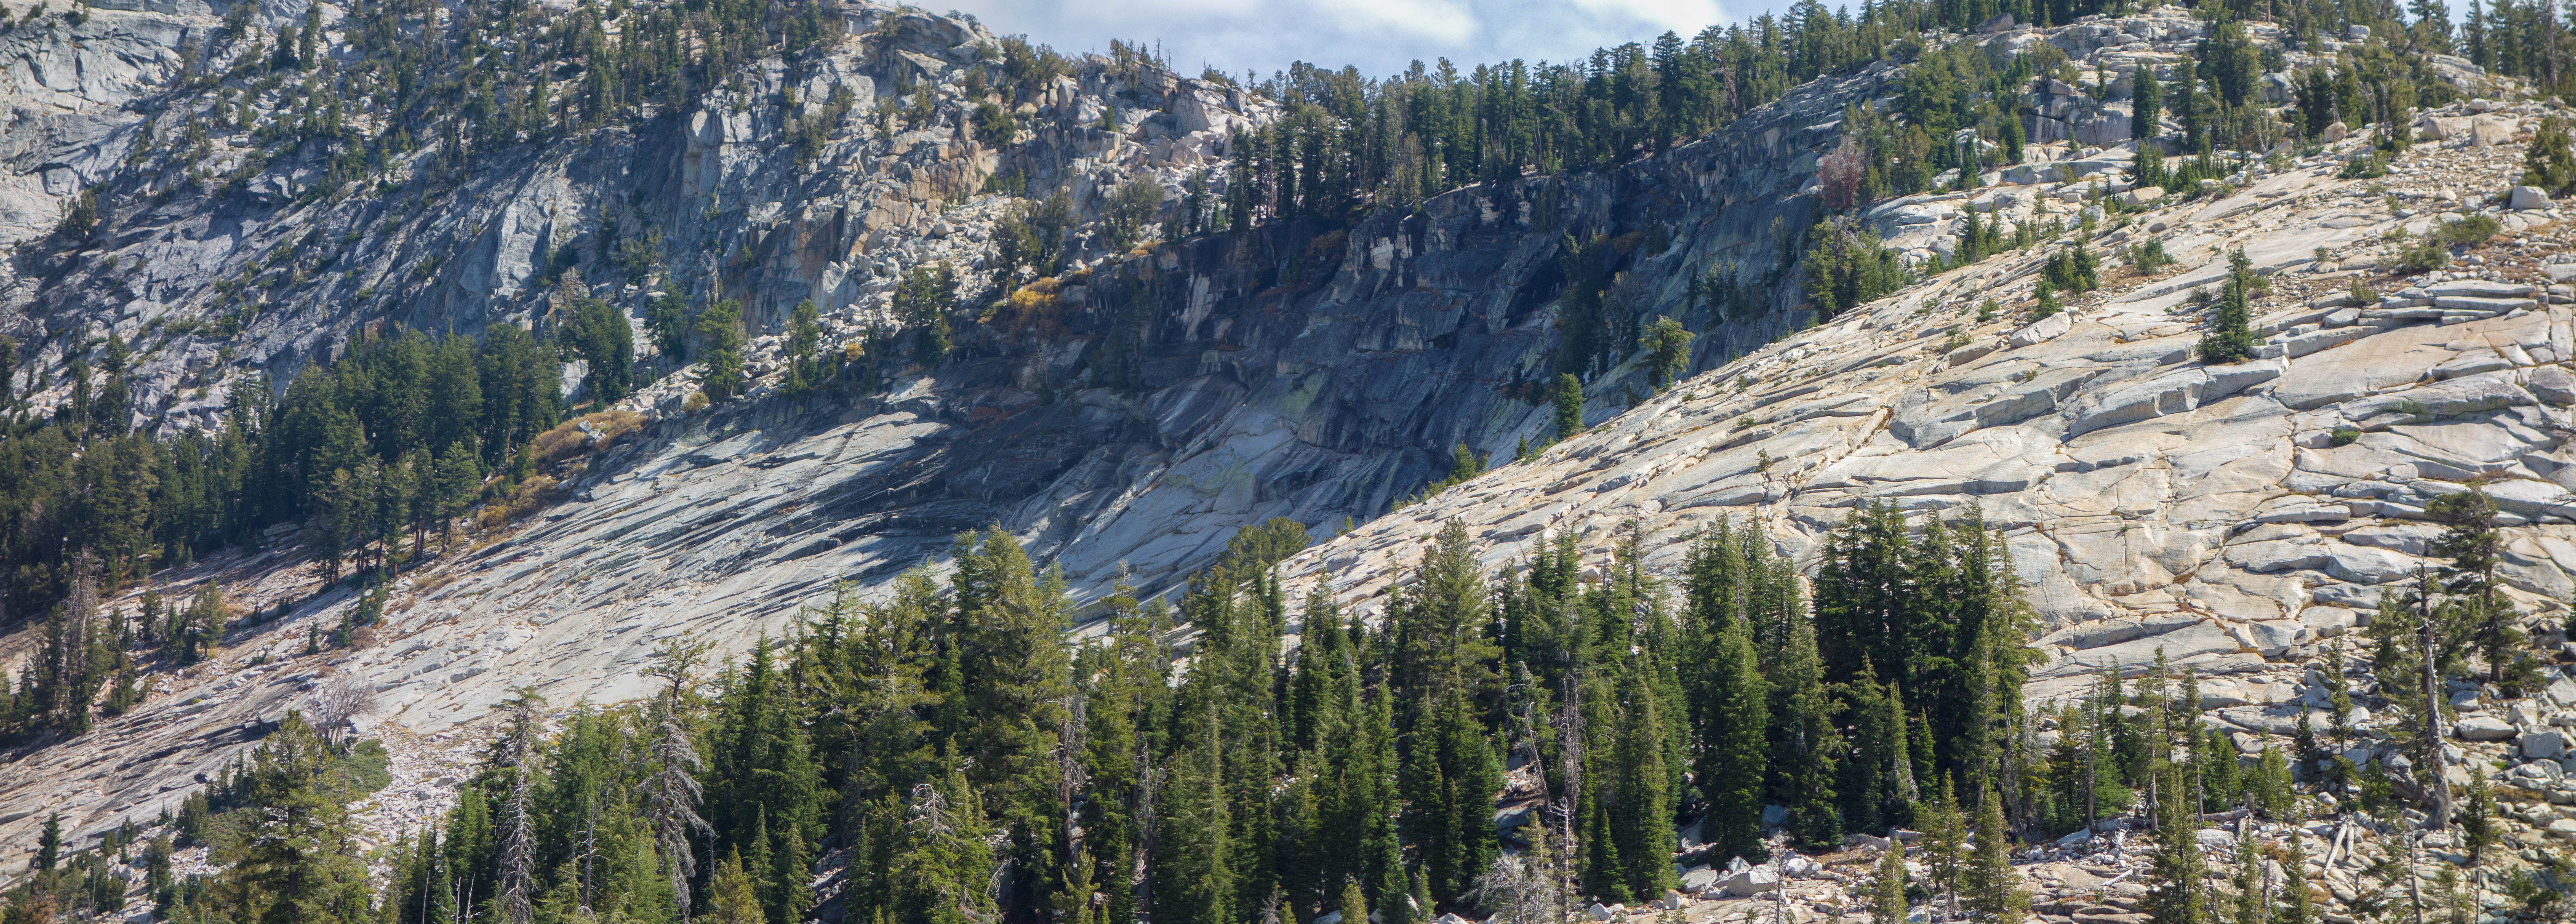 Two possible routes are visible: (1) route enters photo at the left and climbs diagonally upward through the boulder field lying above the cliffs at the center. (2) Route continues across the saddle between the shoulder of Tenaya Peak and the sub-dome, then climbs slabs and continues up the ridge to the summit to the left, out of the photo.